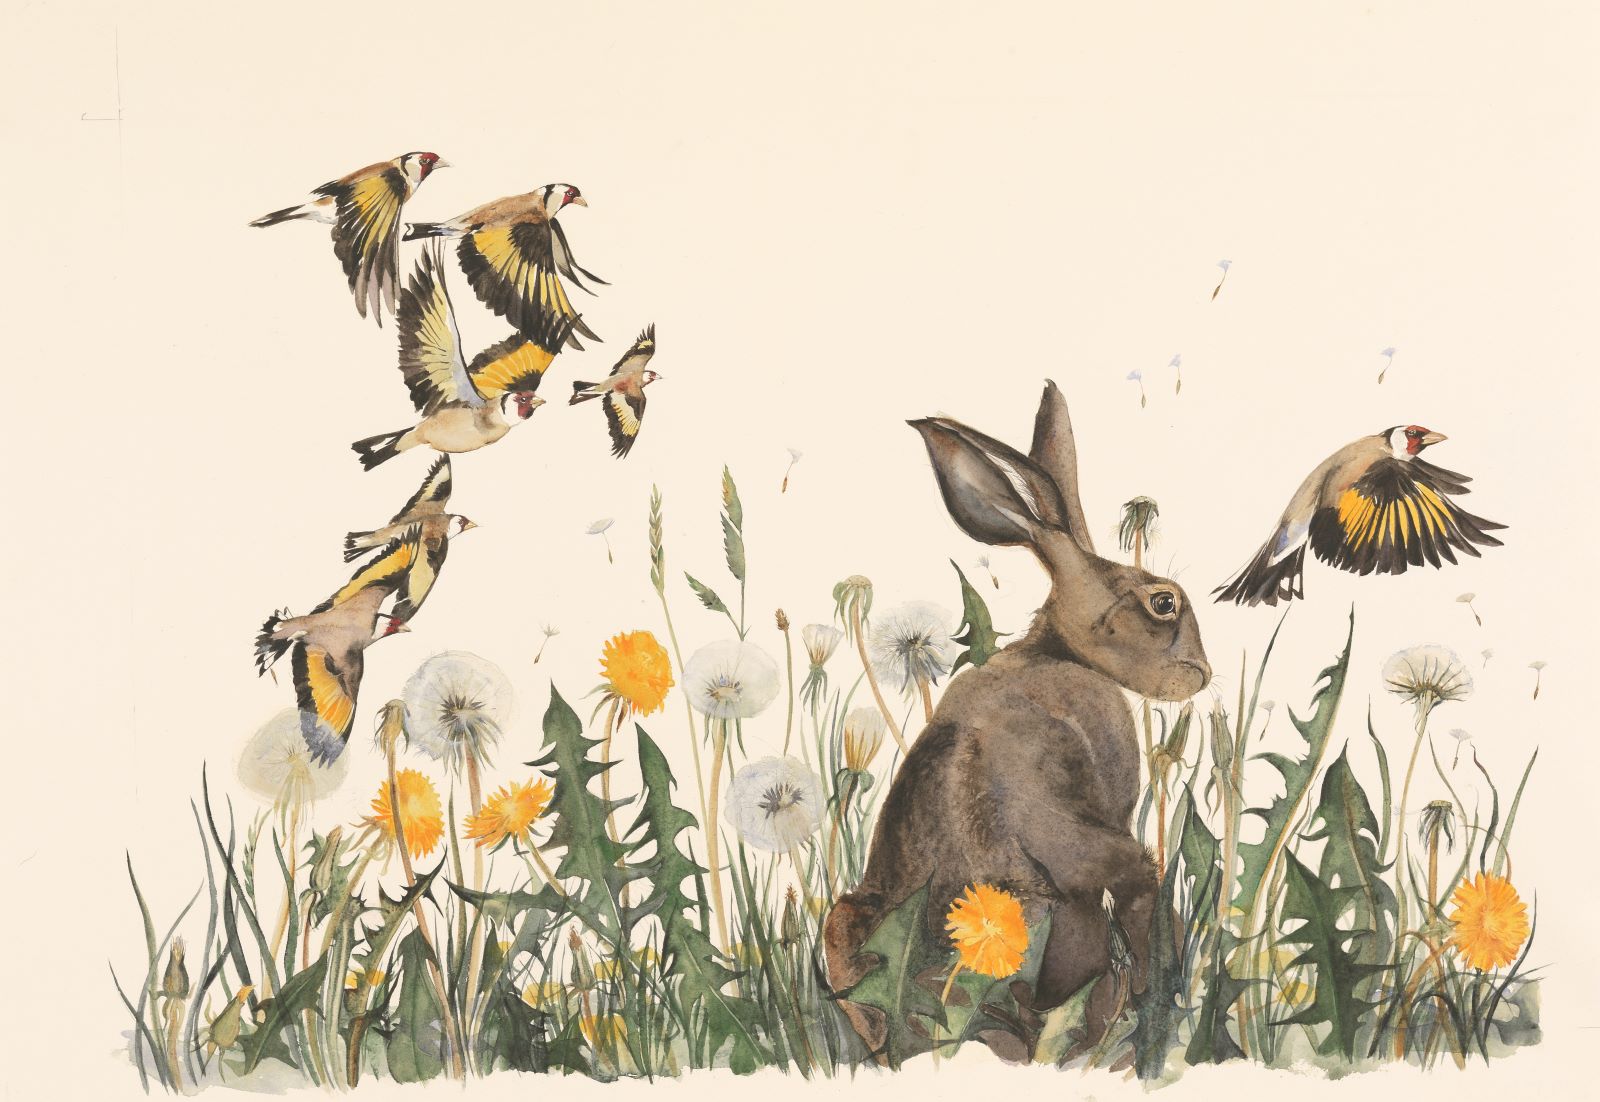 Painting by Jackie Morris showing a hare and dandelions.